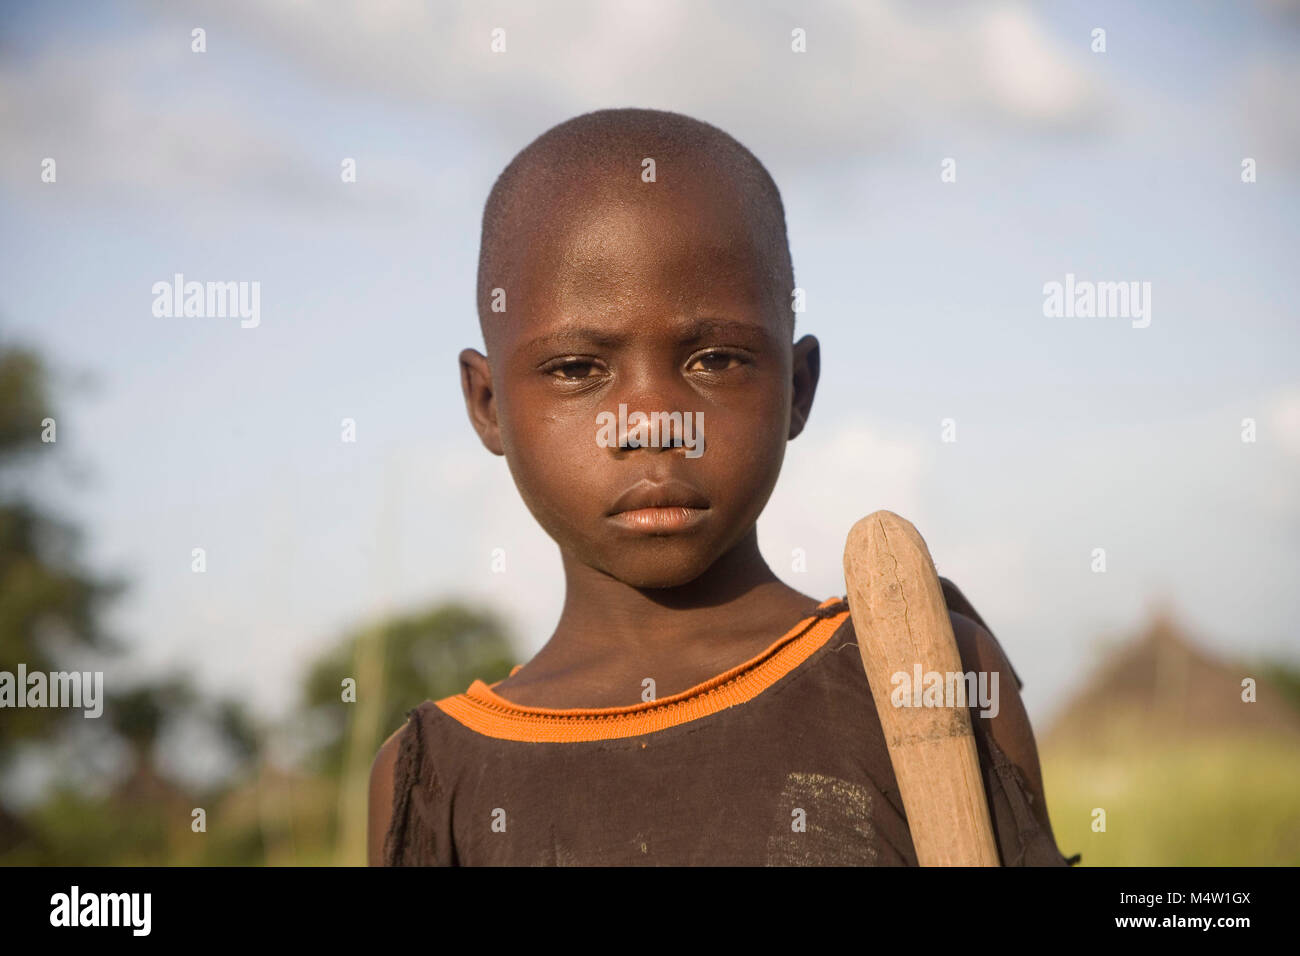 Portrait of Senegalese child in rural are of Senegal Stock Photo